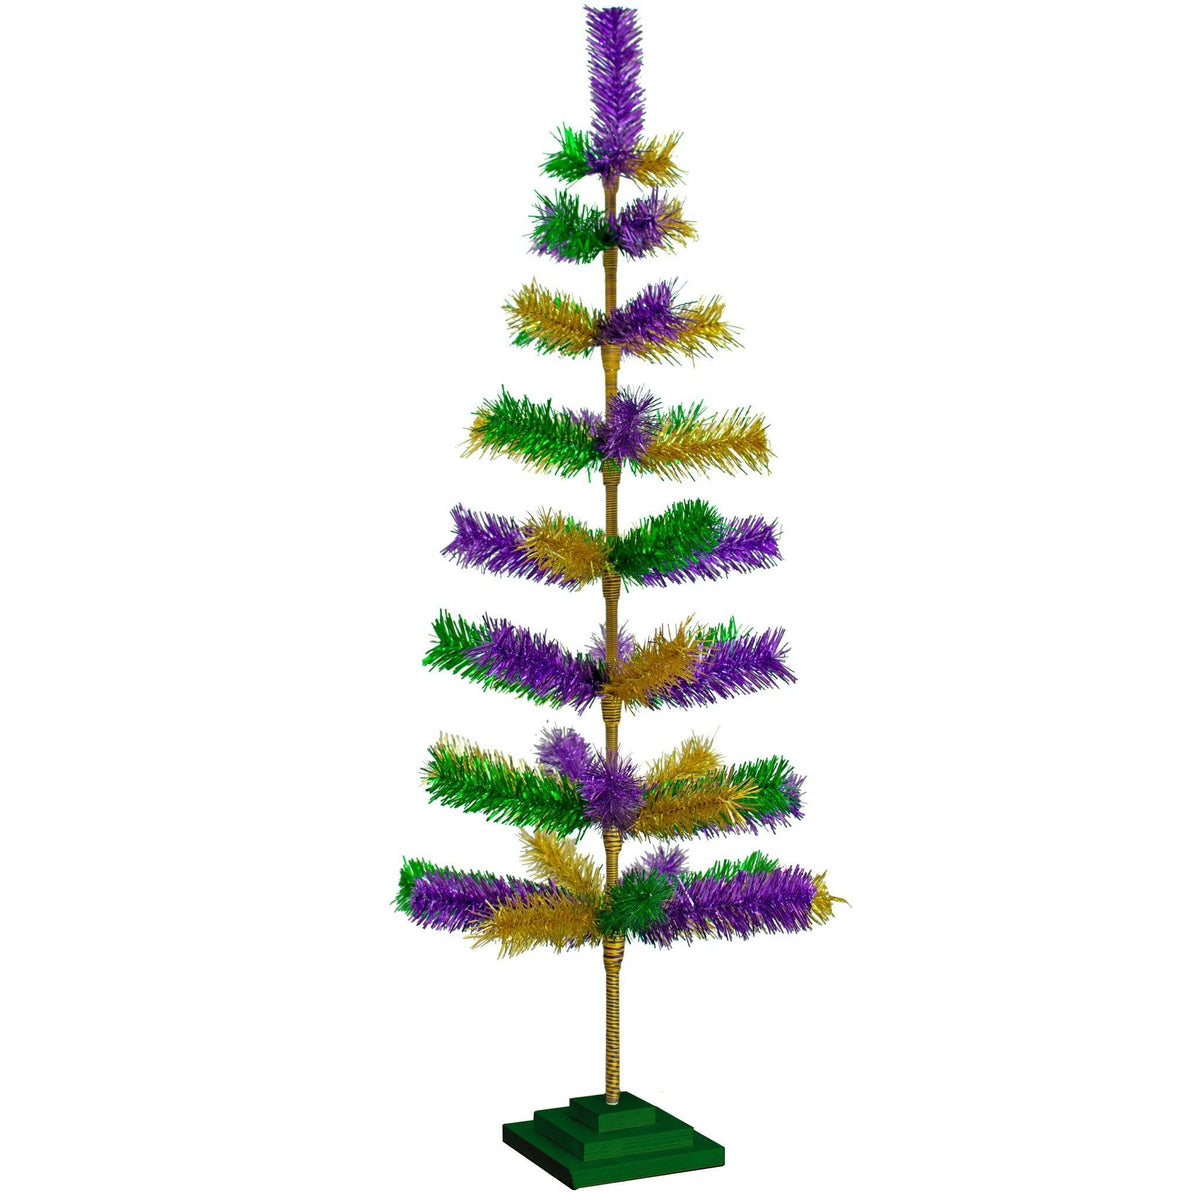 Introducing Lee Display's brand new Purple, Green, & Gold Christmas Trees made by hand in the USA! Decorate your holidays with a classic Mardi Gras-themed Tinsel Christmas Tree on sale at leedisplay.com